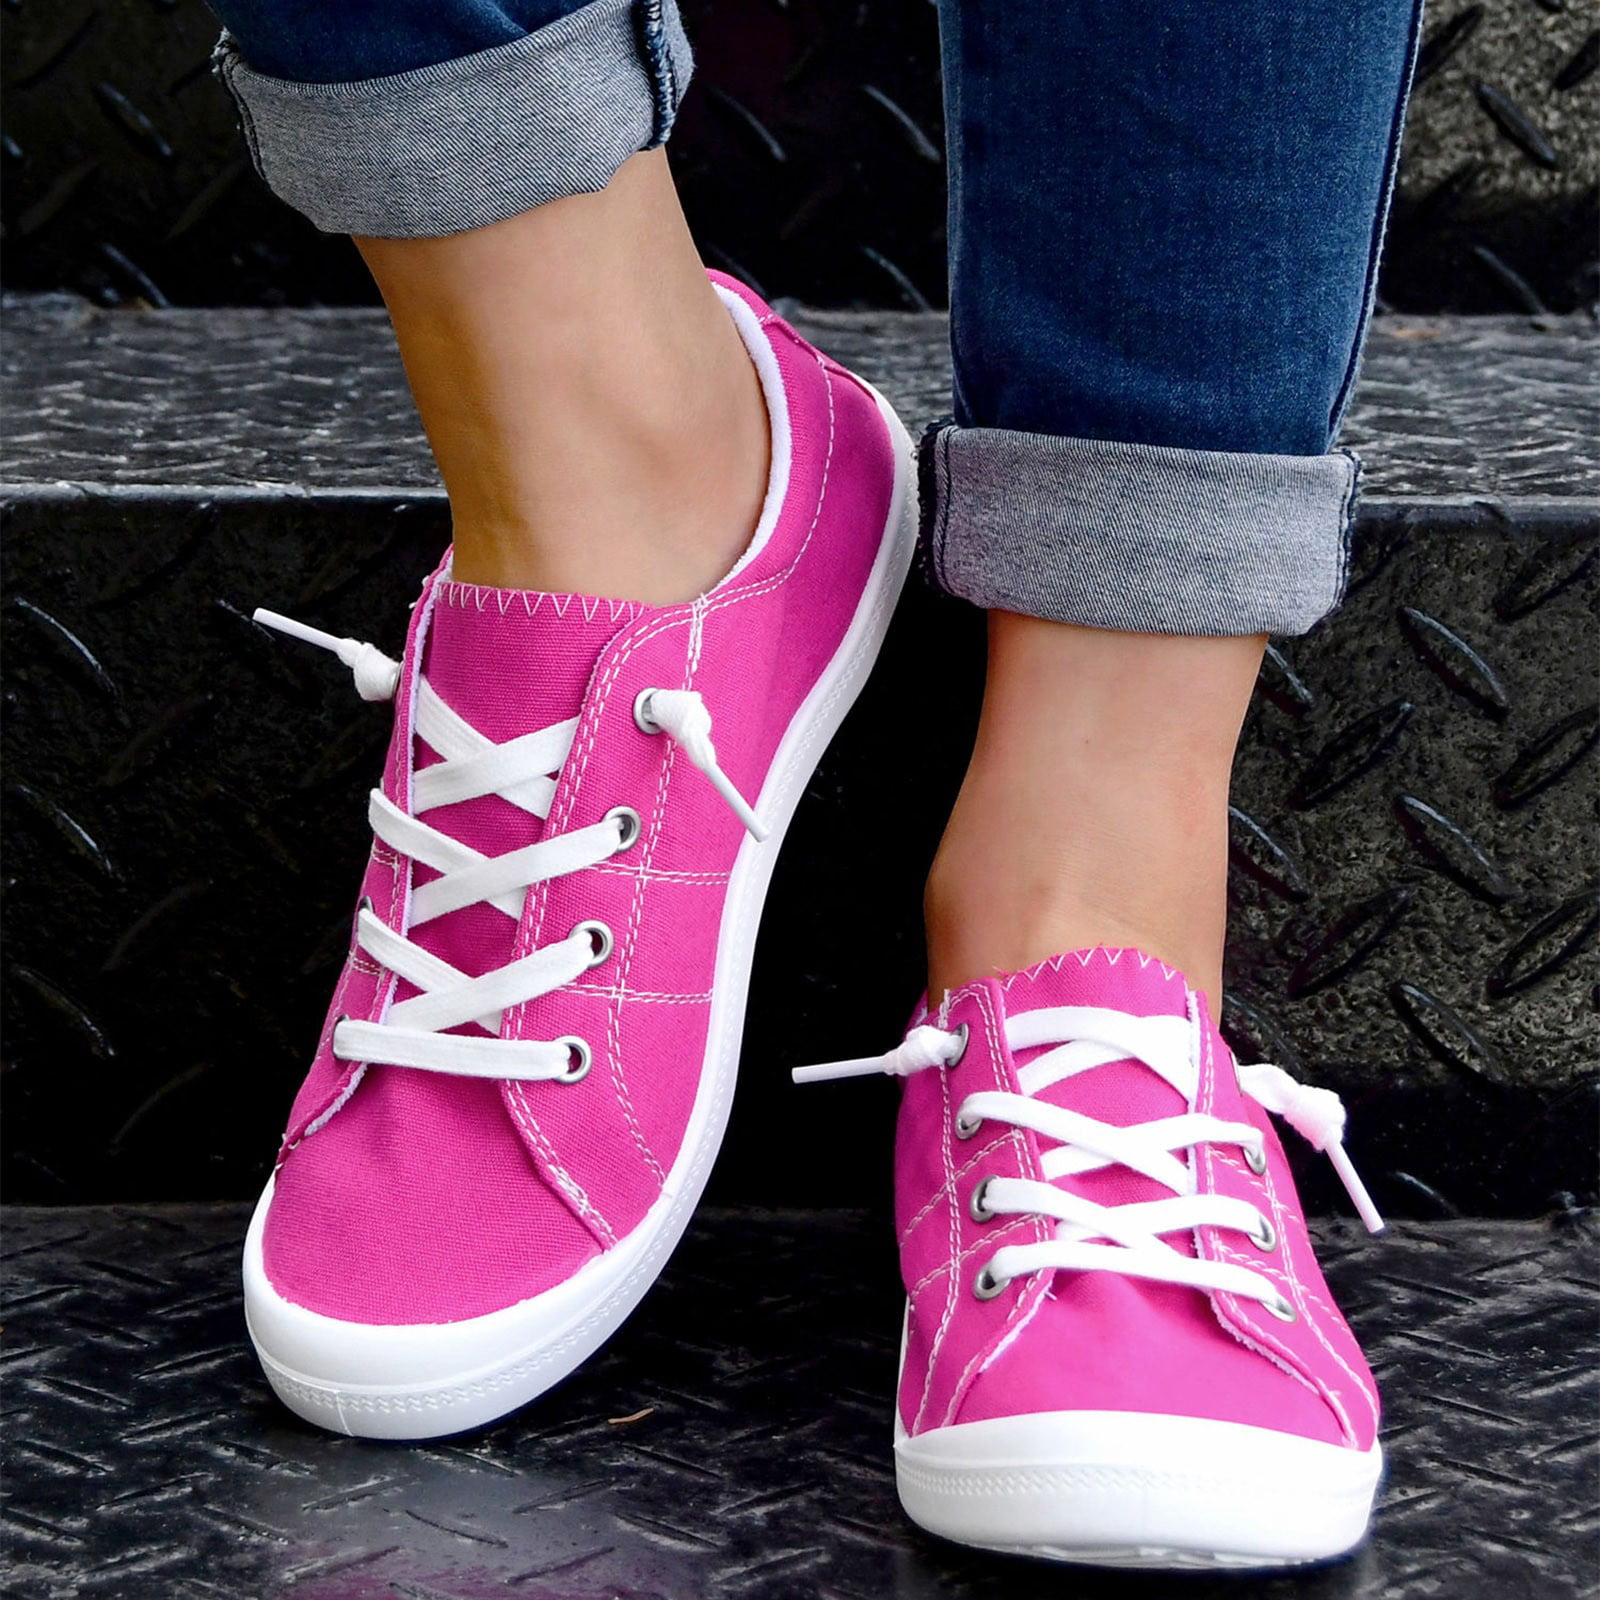 Pimfylm Coach Sneakers For Women Women's Canvas Shoes Fashion Sneakers Low  Top Tennis Shoes Lace up Casual Shoes Hot Pink 8